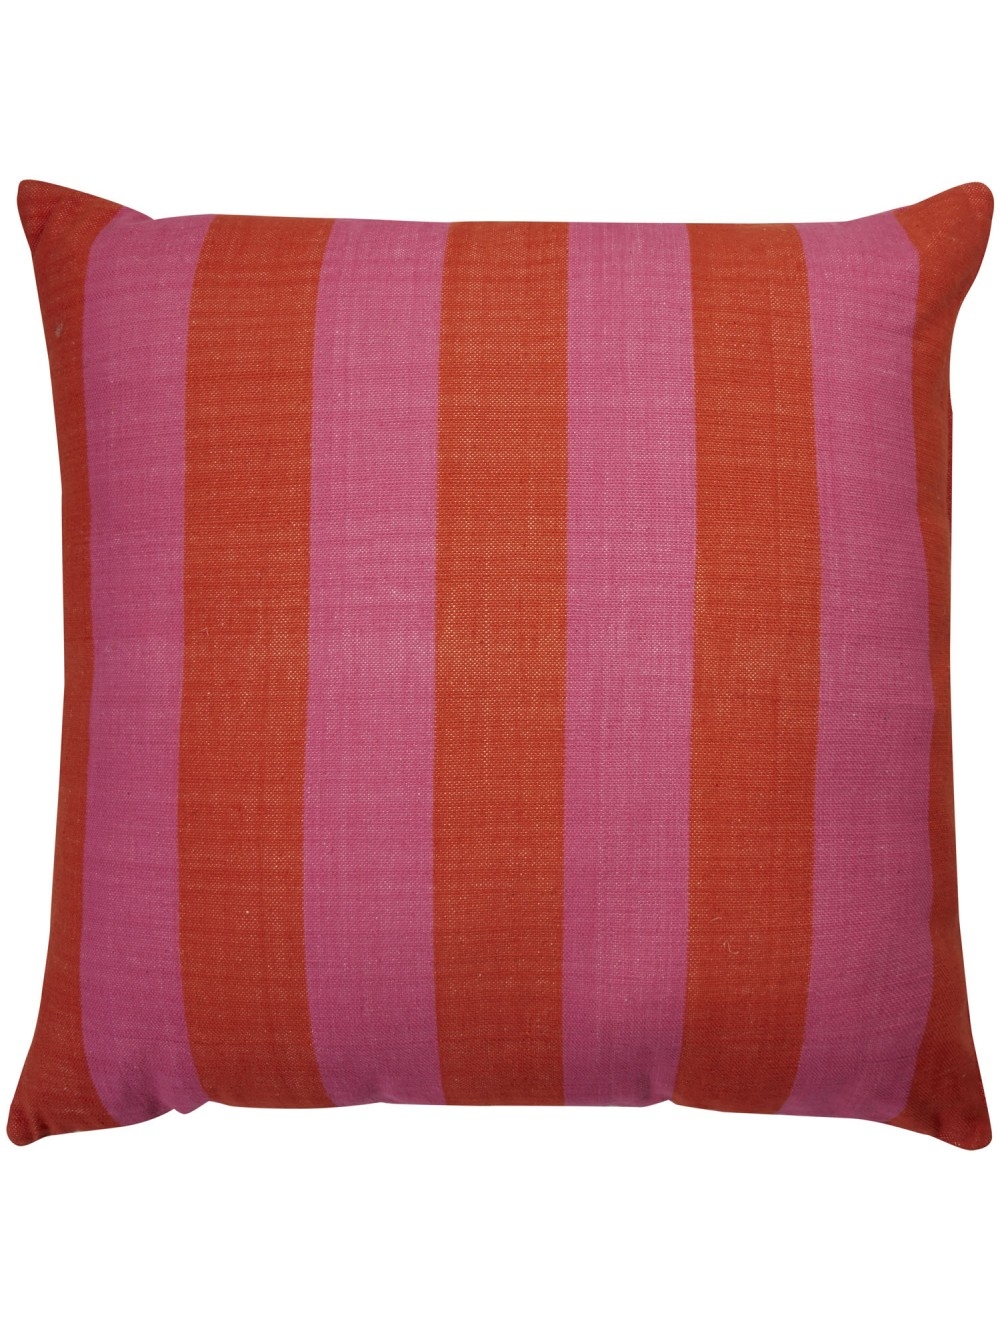 KATE SPADE NEW YORK YORKVILLE DOUBLE STRIPE PILLOW, PINK-20x20-down fill - Image 0